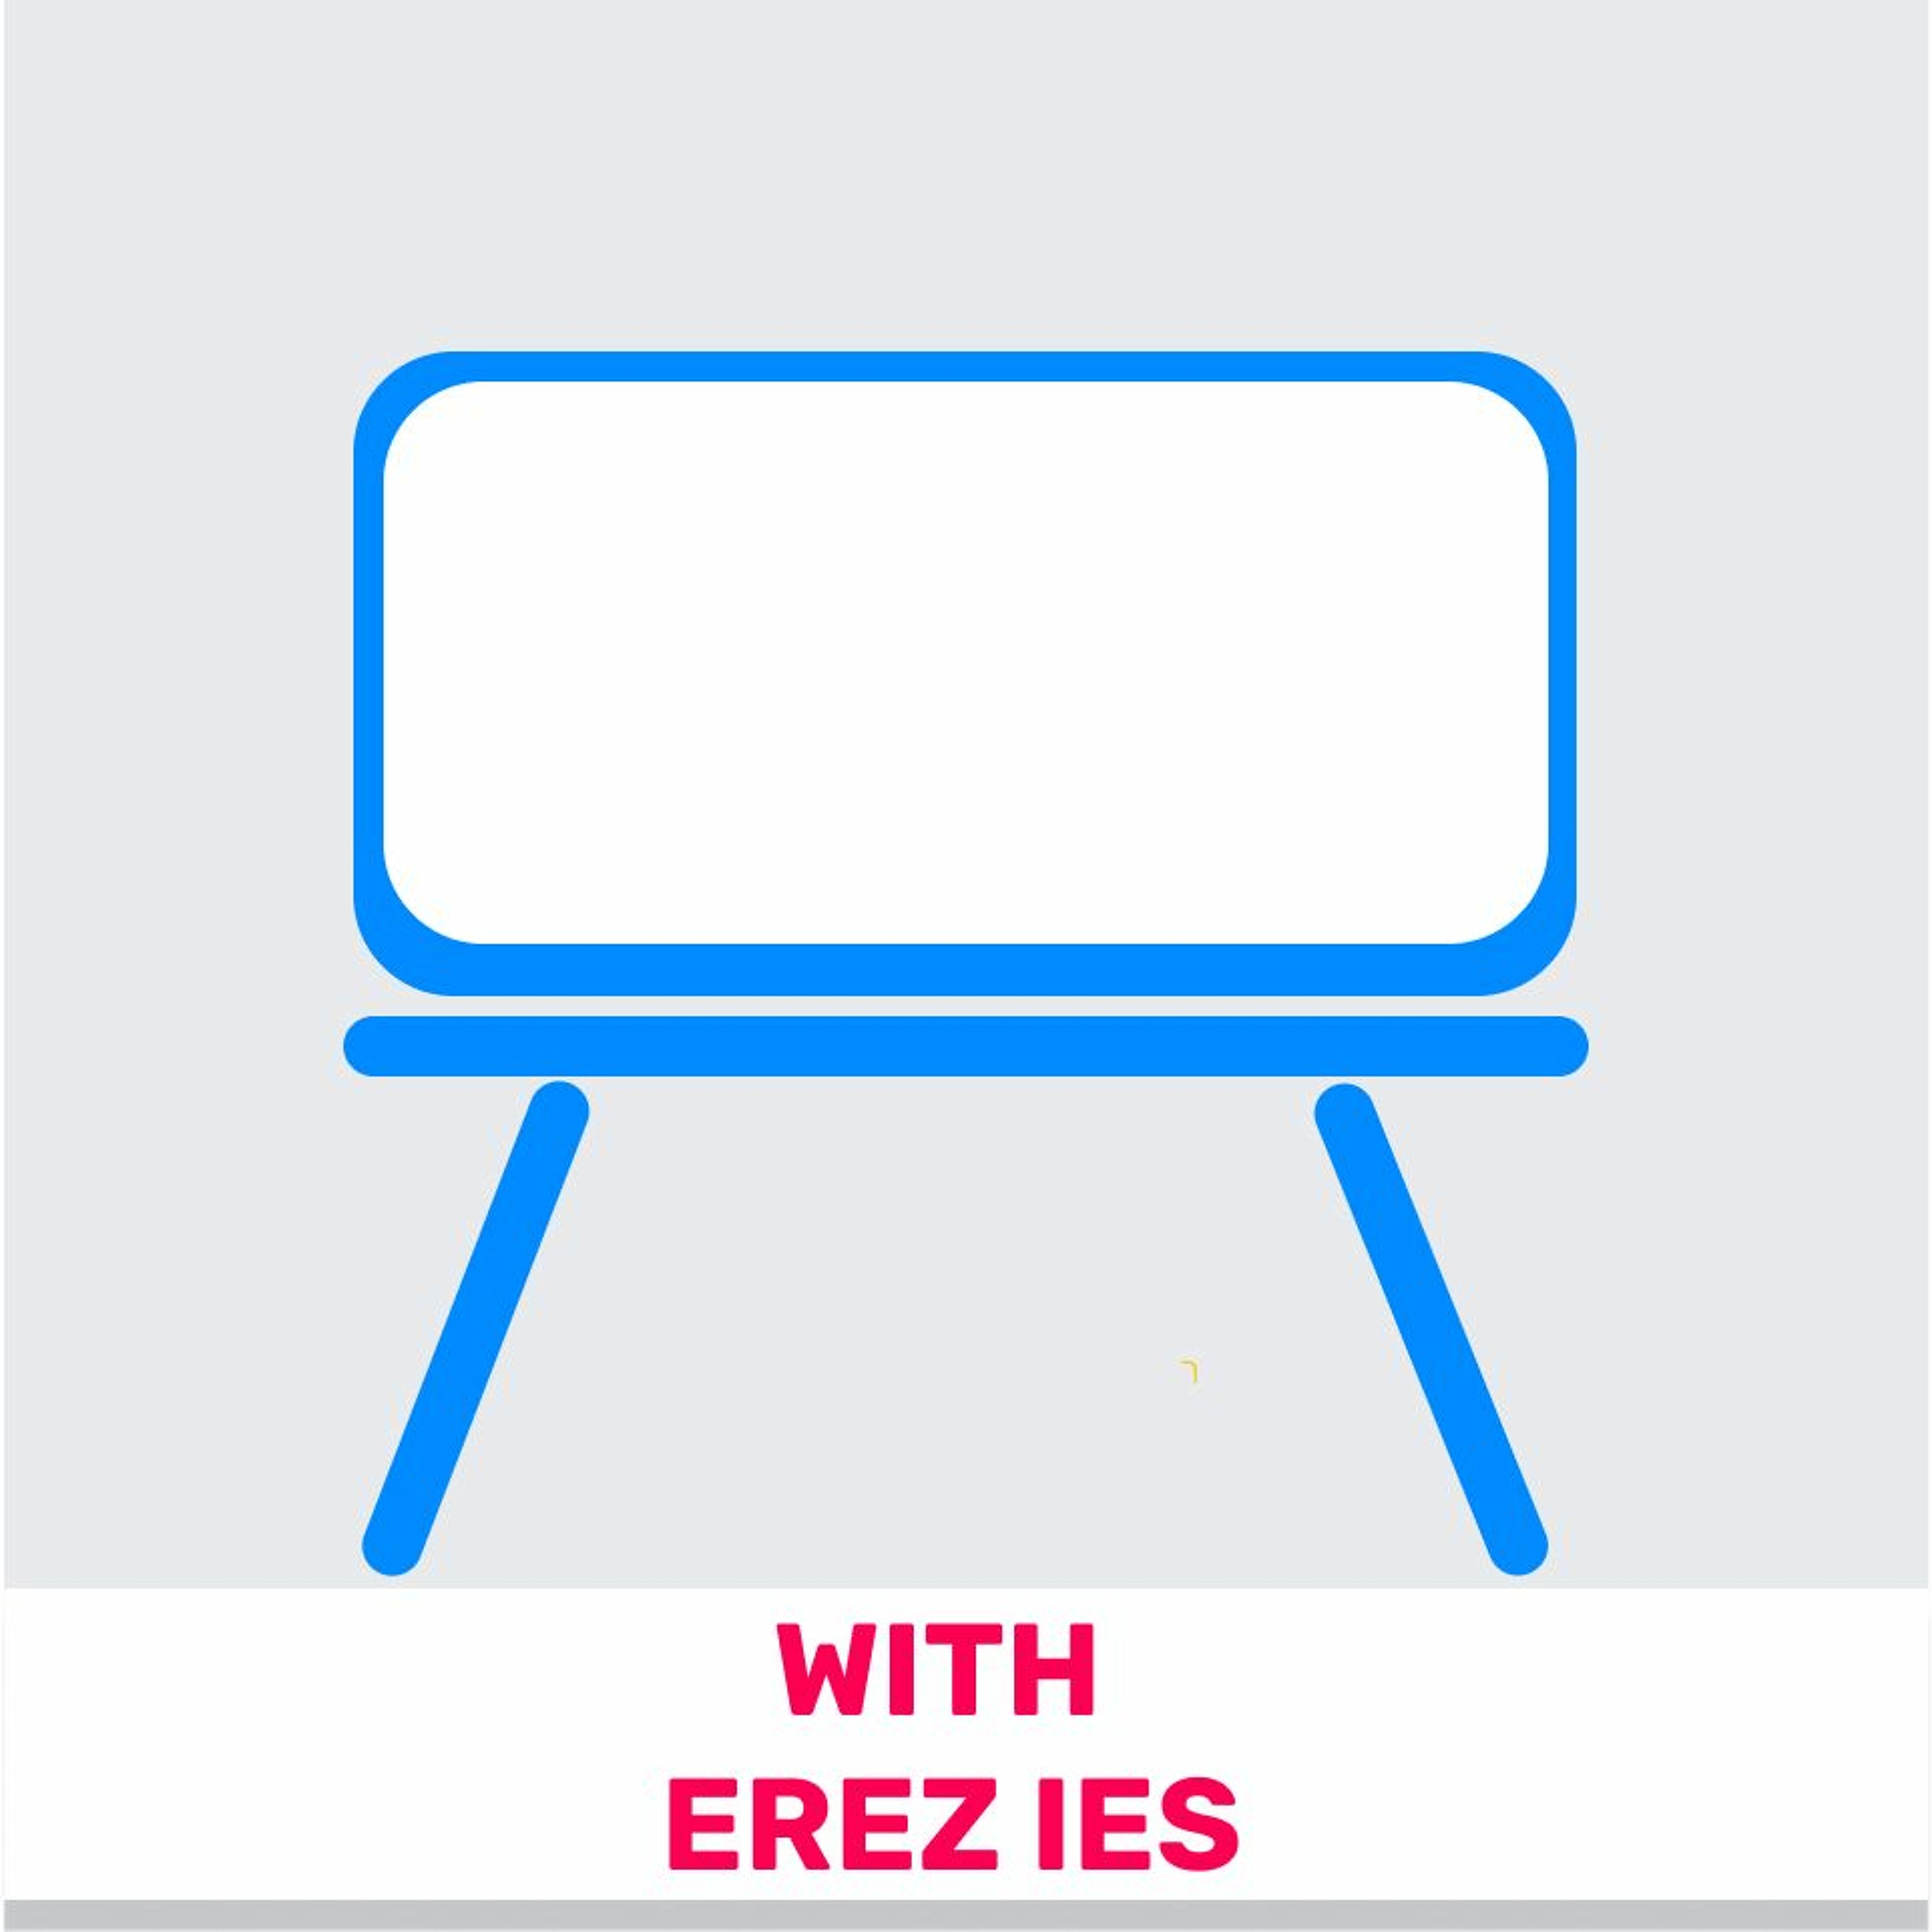 229 - Mentoring and Learning (Featuring Erez Ies)